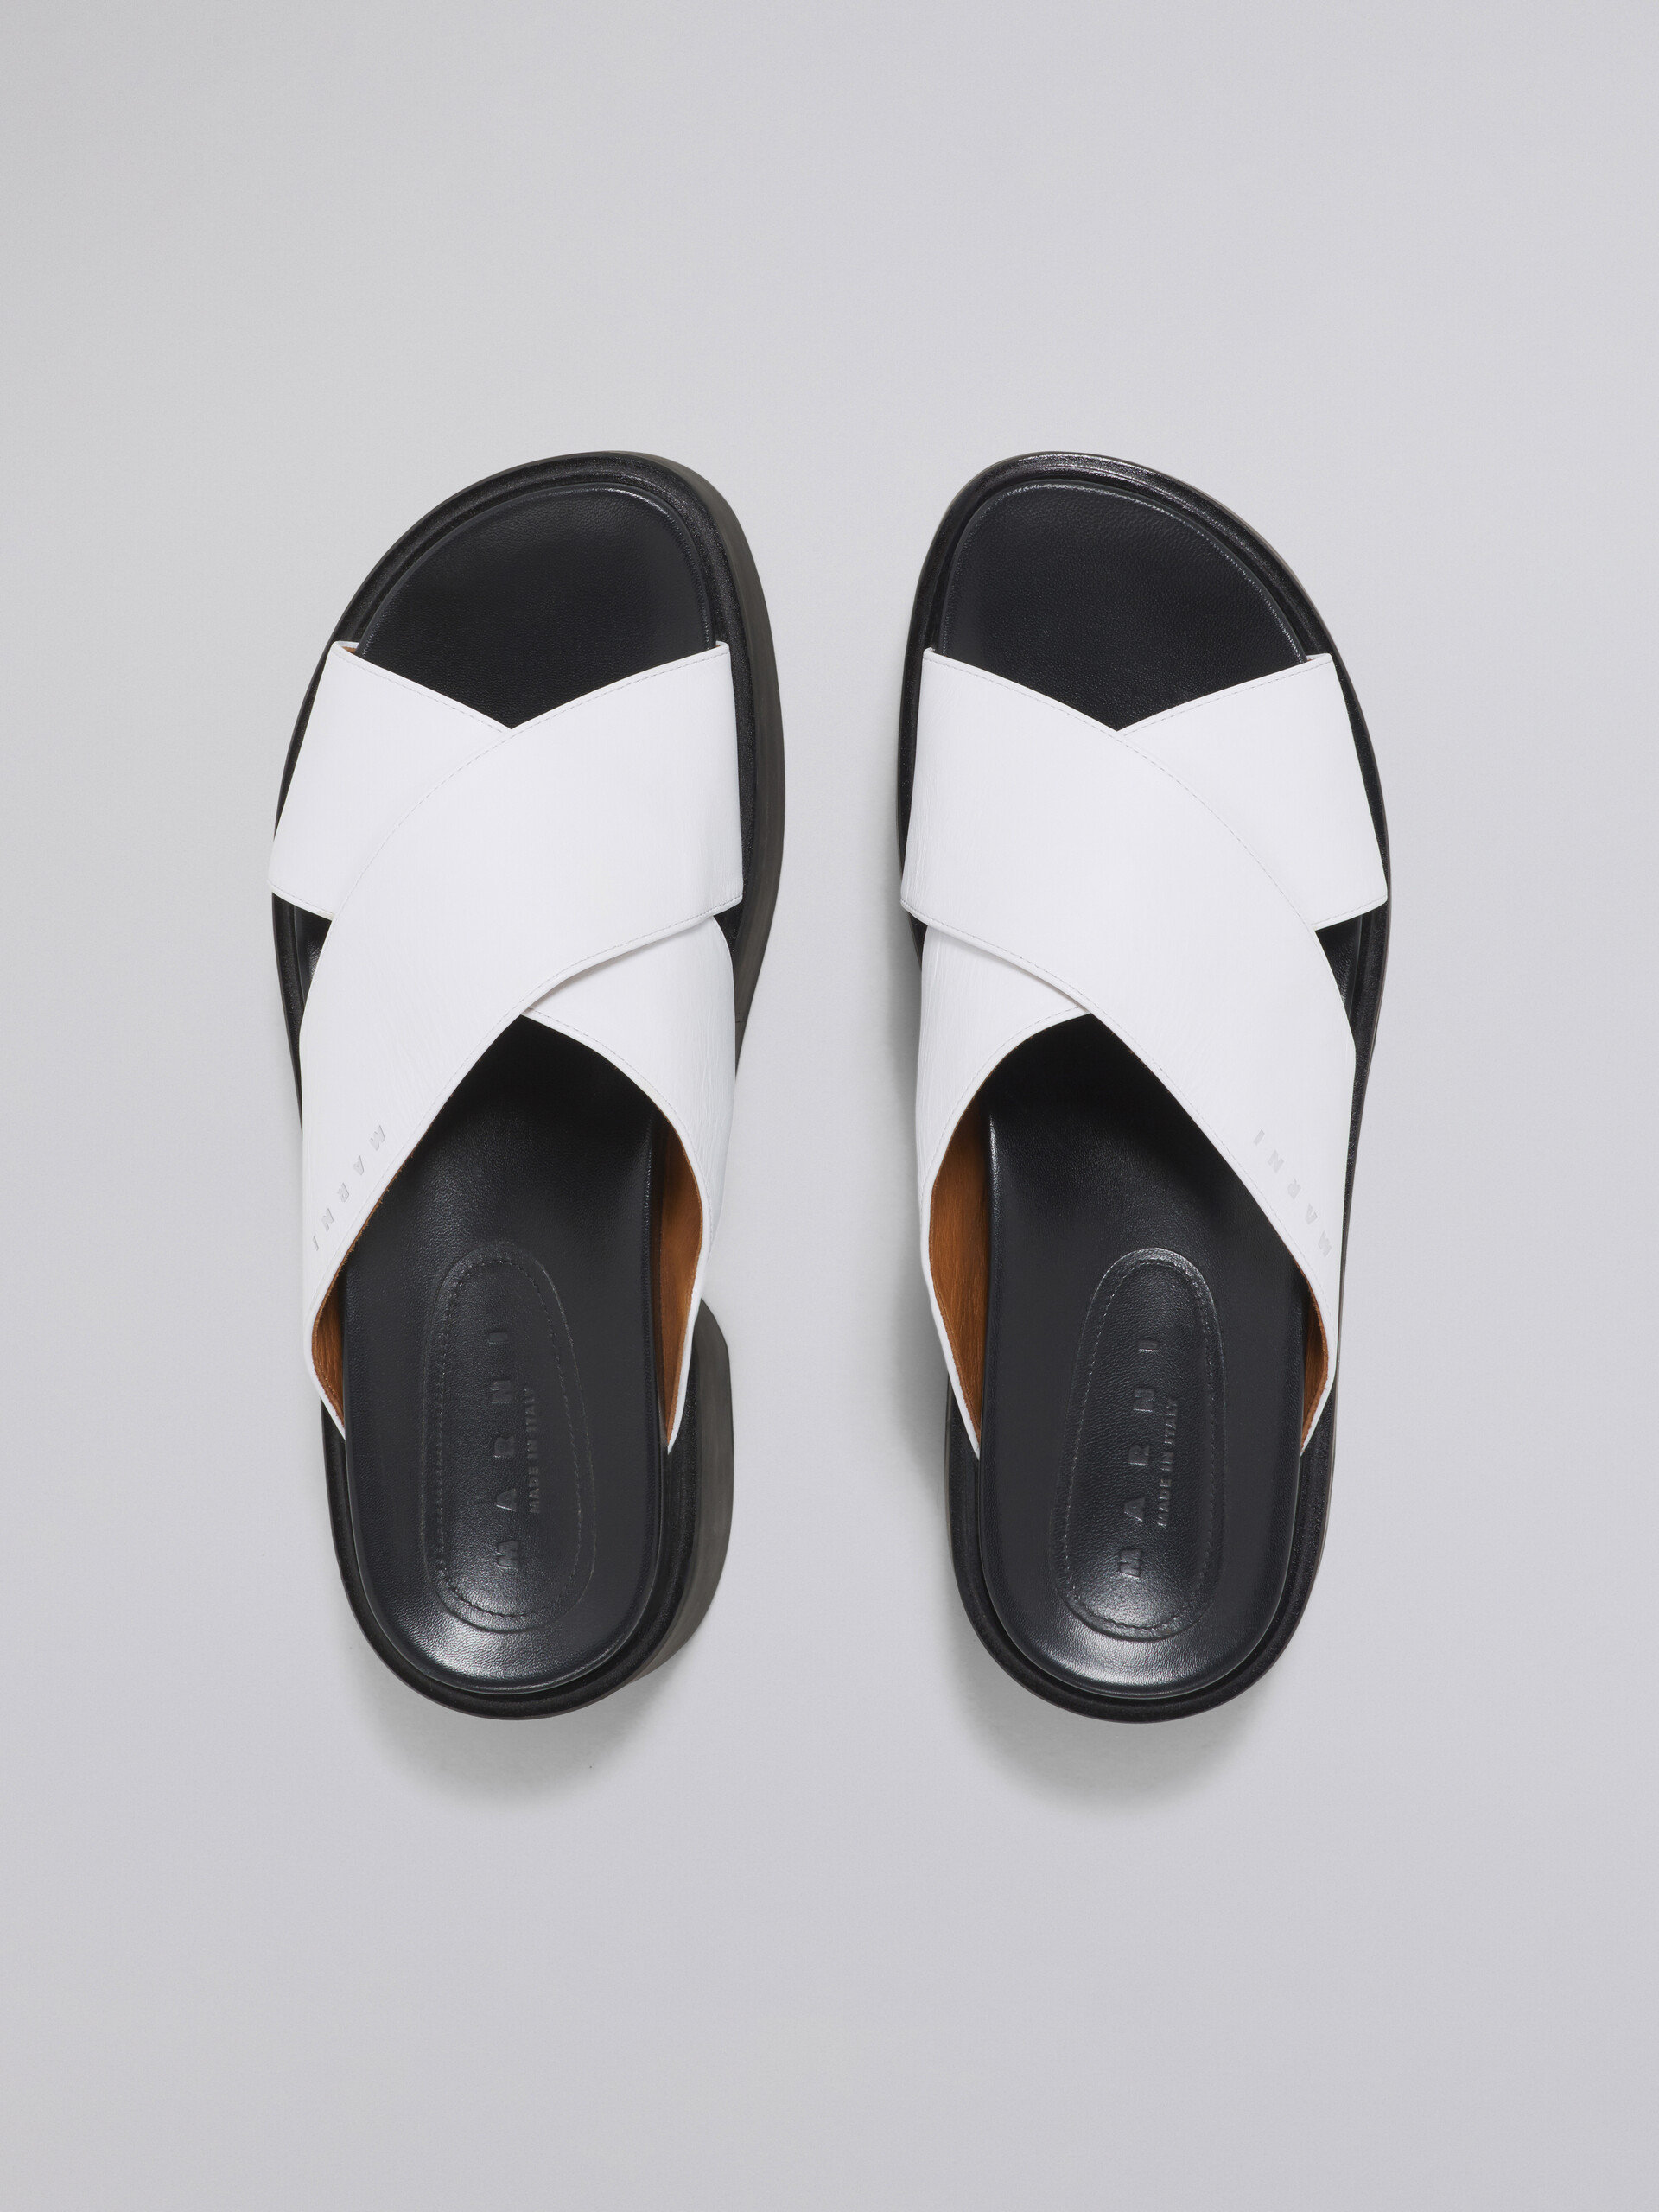 Criss-cross wedge in white calf leather - Sandals - Image 4